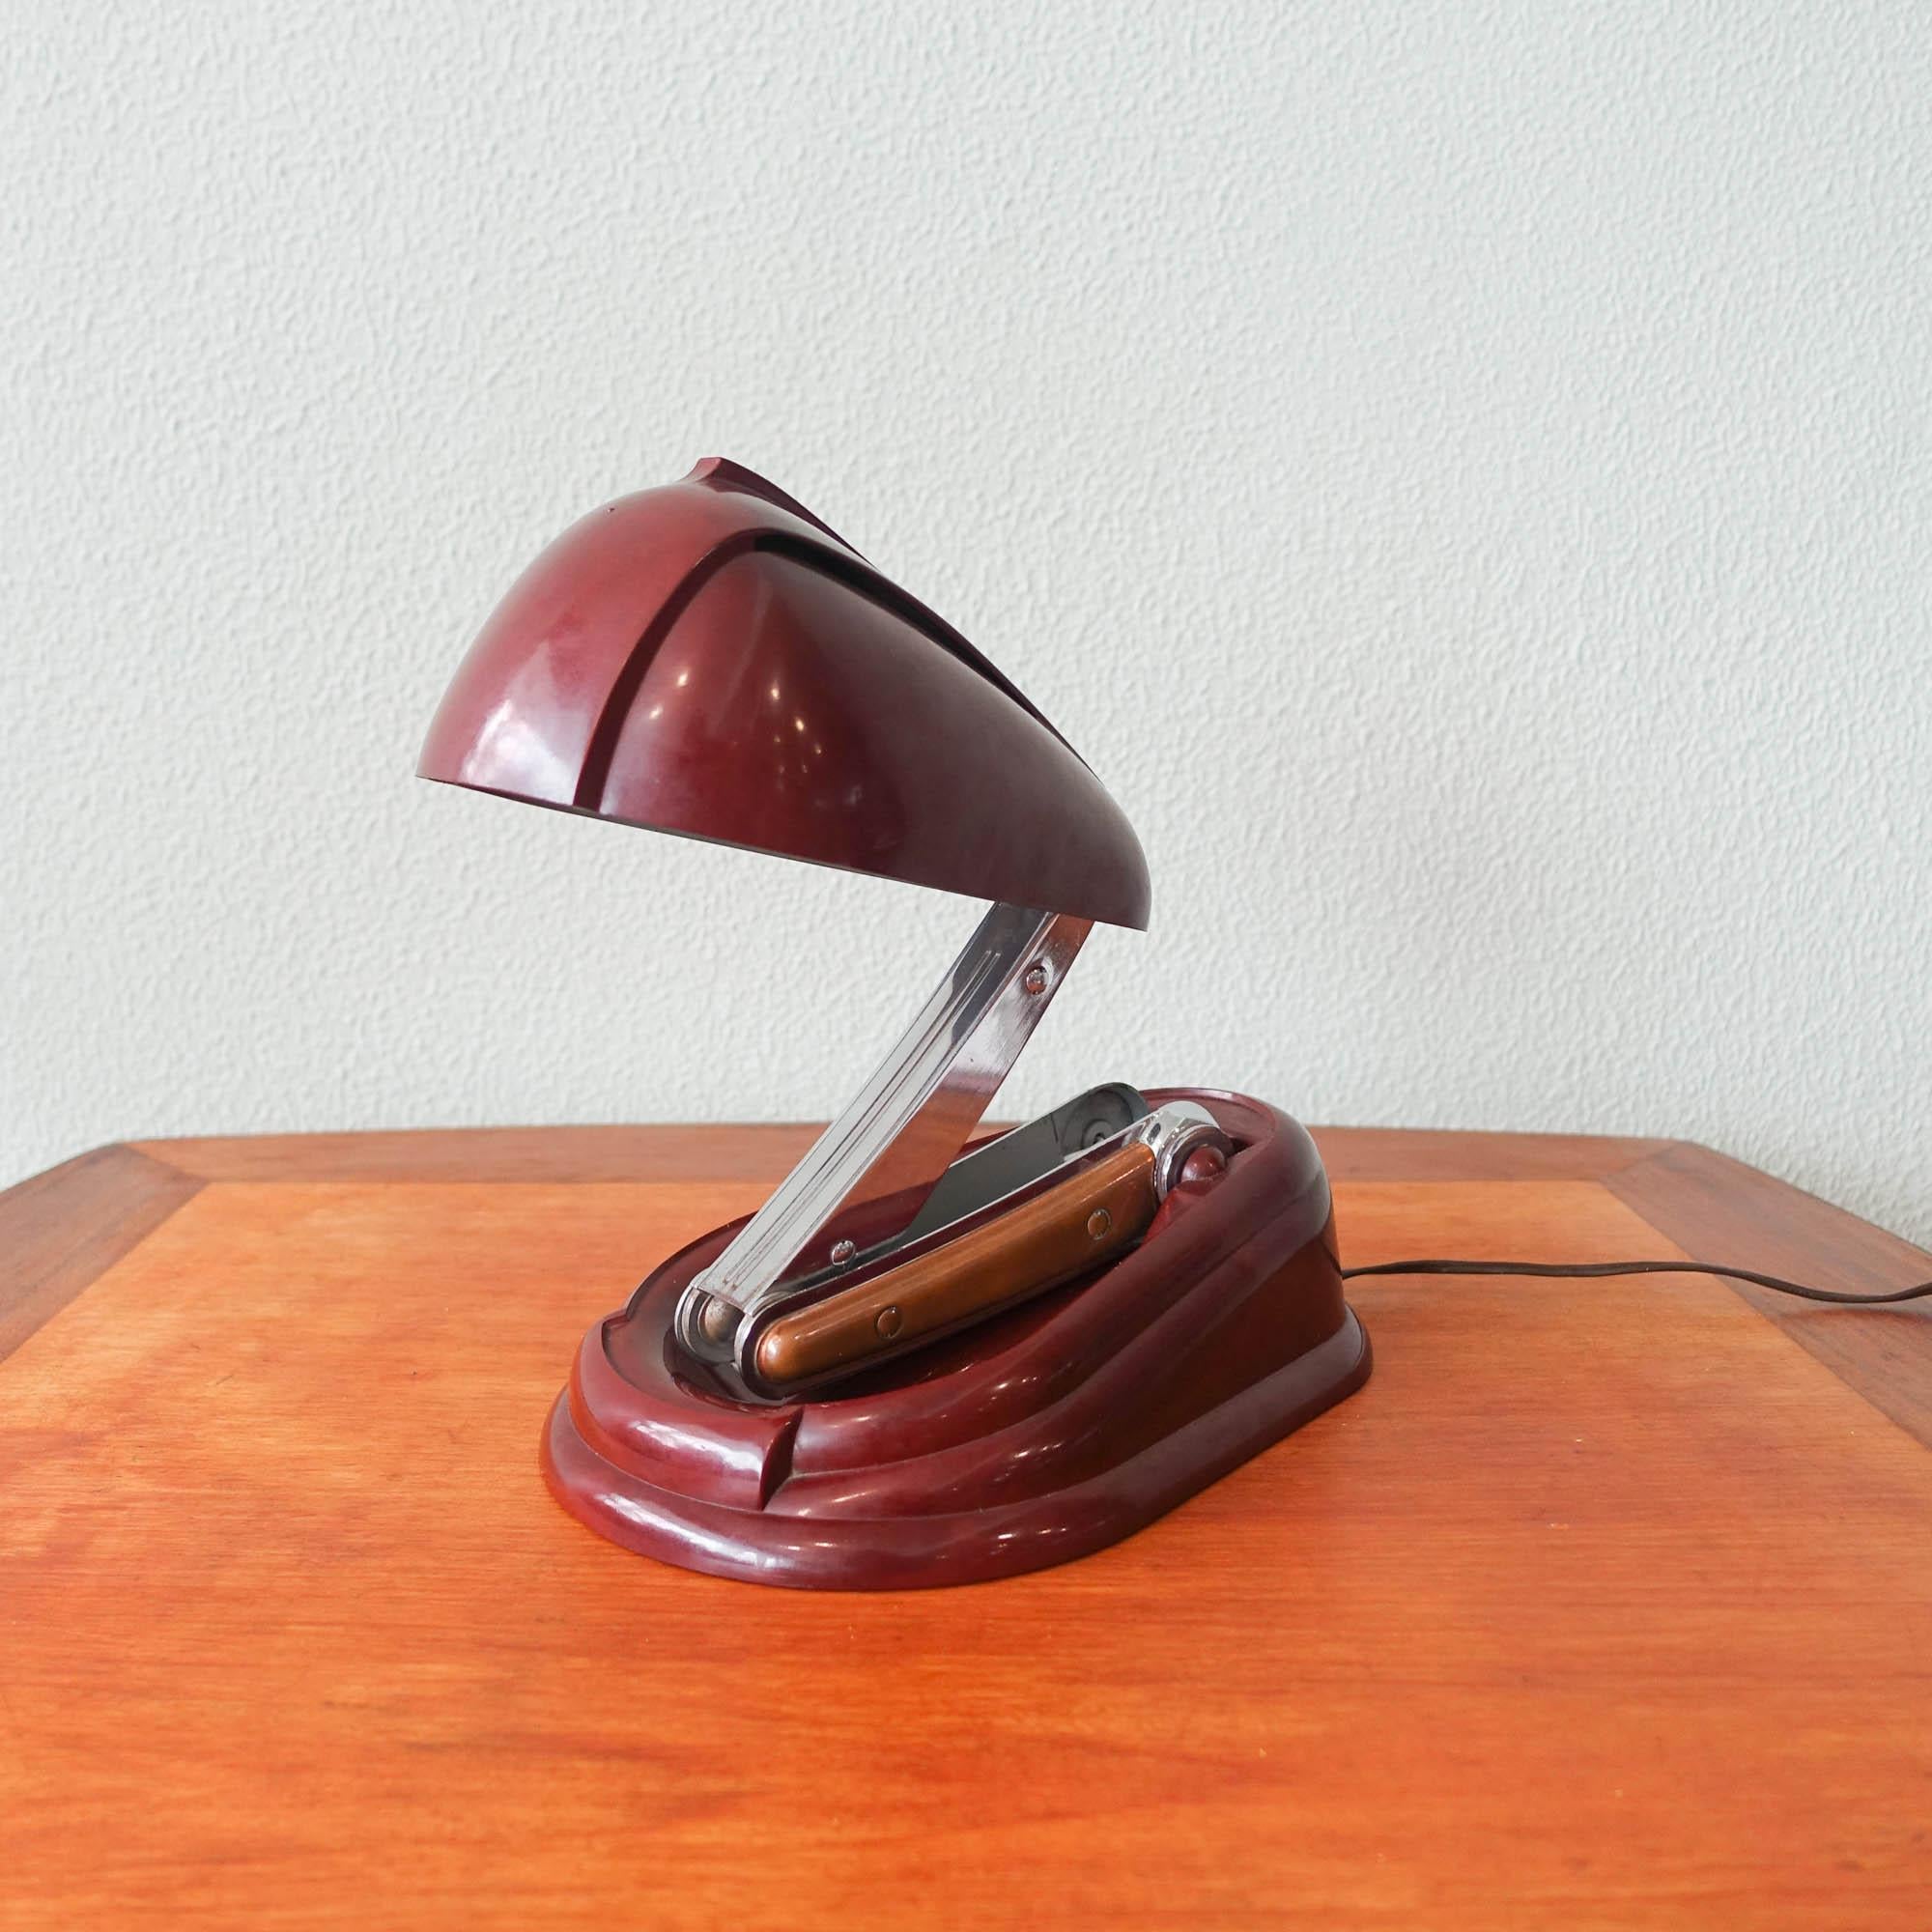 French Model Bolide Table Lamp by Jumo Brevete for Jumo, 1940s For Sale